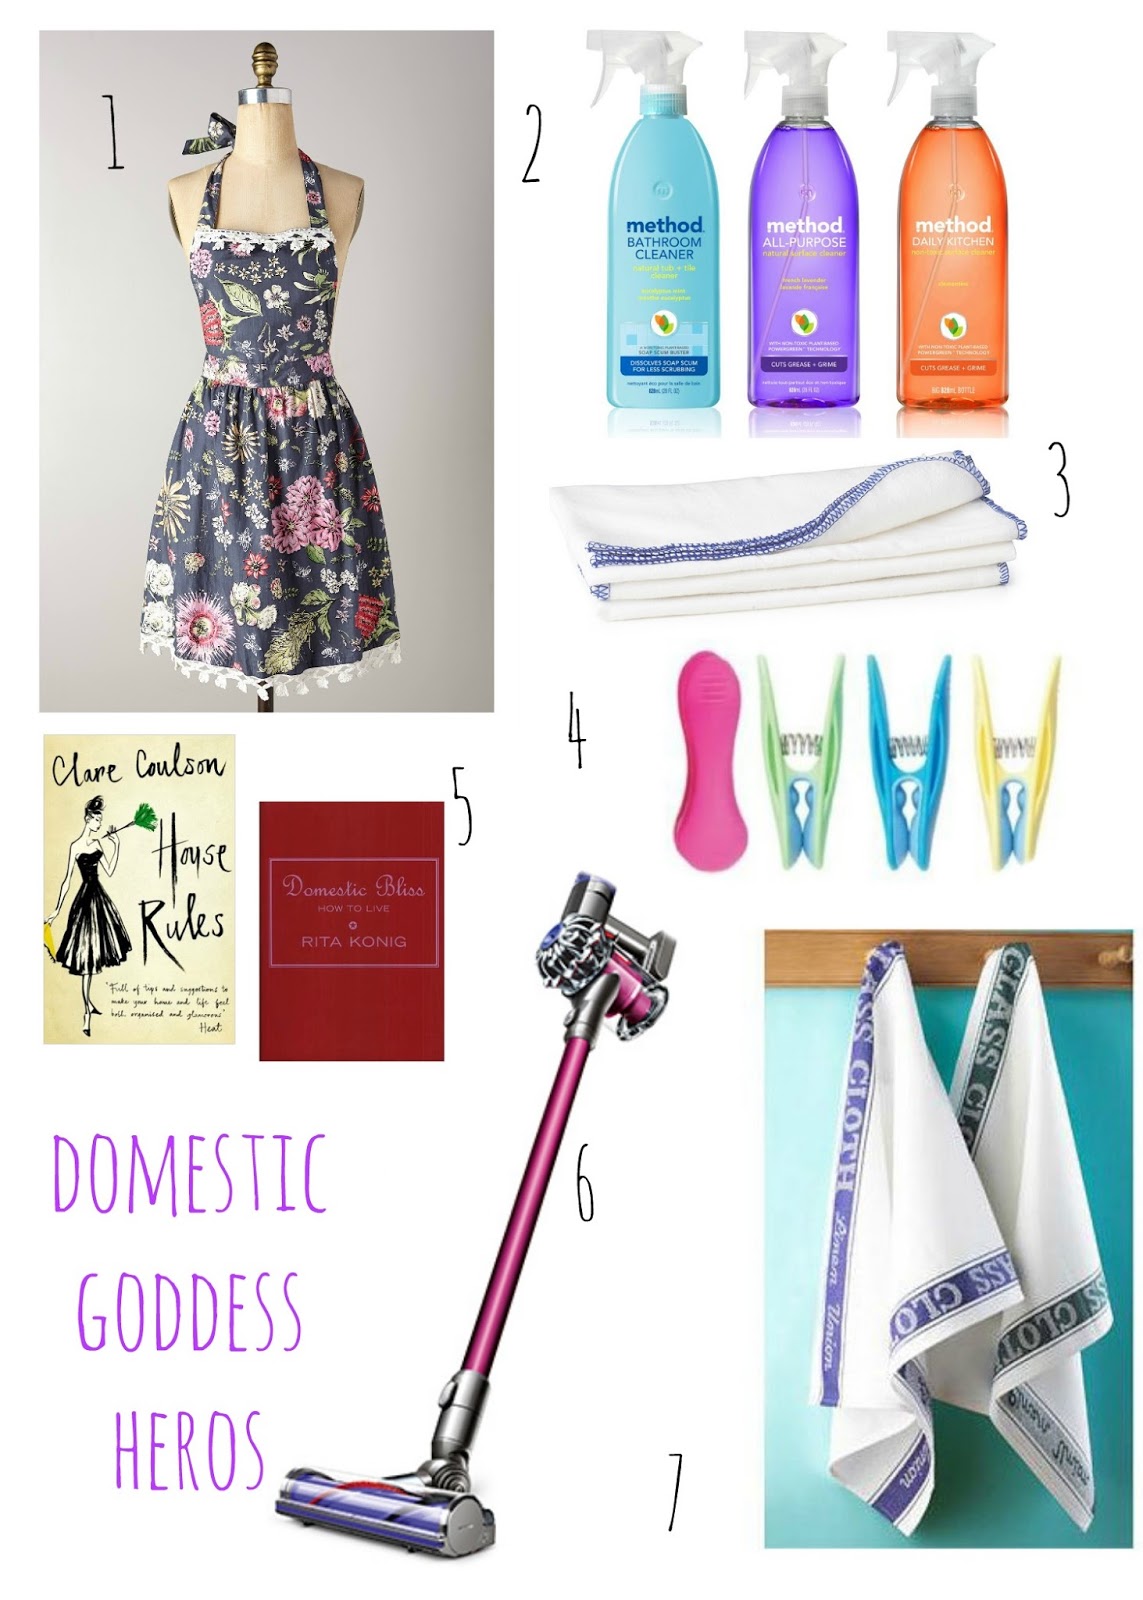 mamasVIB | V. I. BUYS: Housework magic … how to be a Domestic Goddess with my 5 easy steps!, the magic art of tiding, domestic bliss, cleaning trick, tiding, dyson hoover, dyson v6, rita konig, cleaning rules, house rules, how to make your bed, clutter control, clean, tidy, tips, housewife